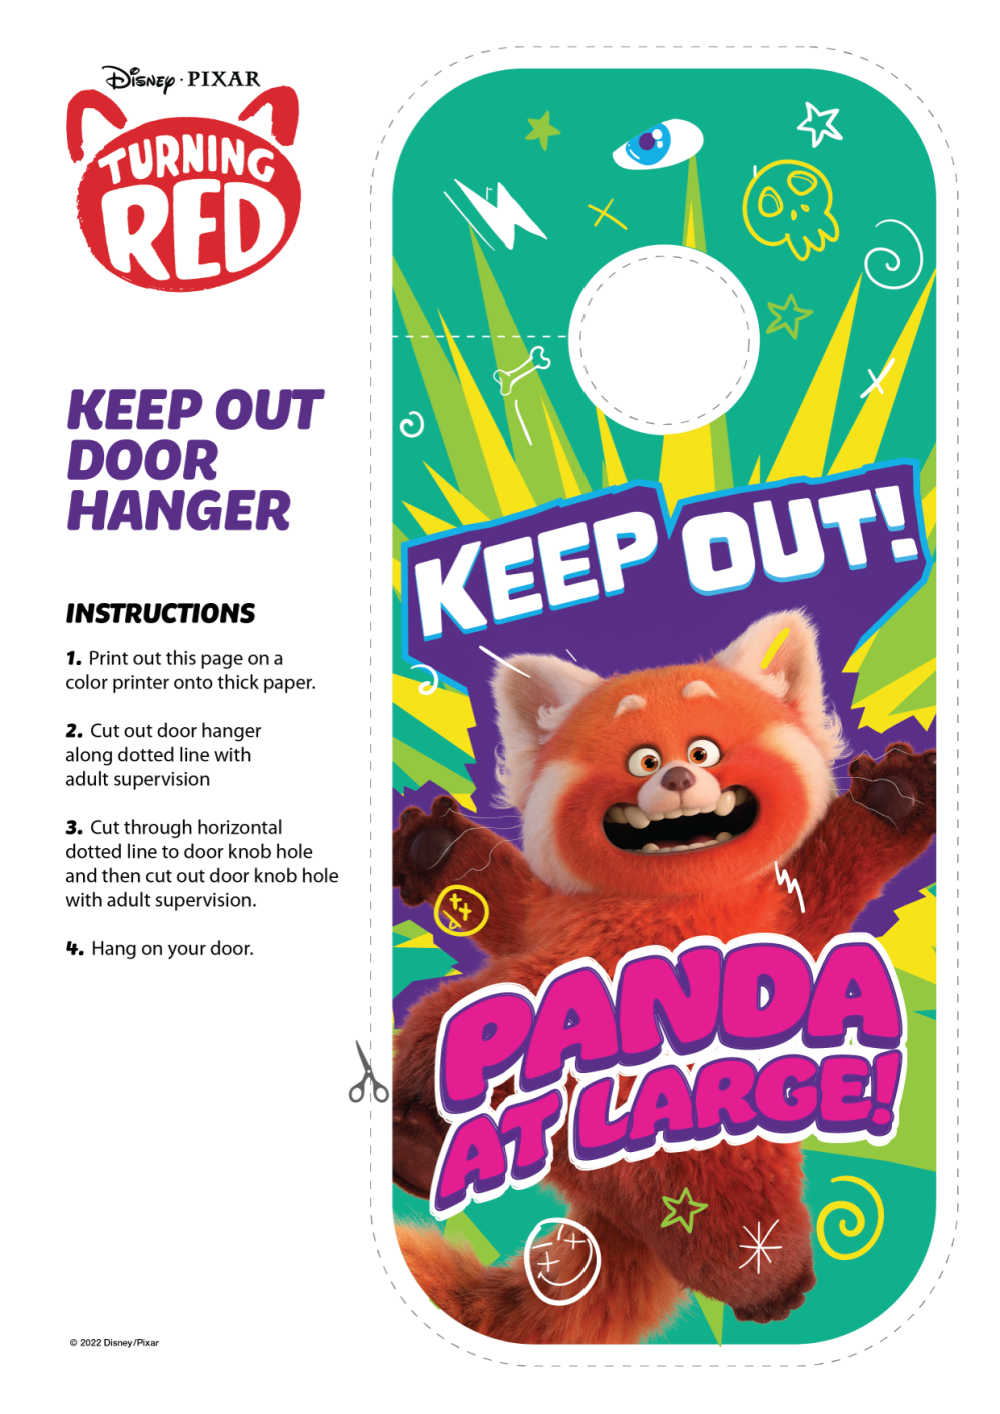 Your kids can have Disney Pixar fun at home, when you download and print the free Turning Red door hanger craft. 